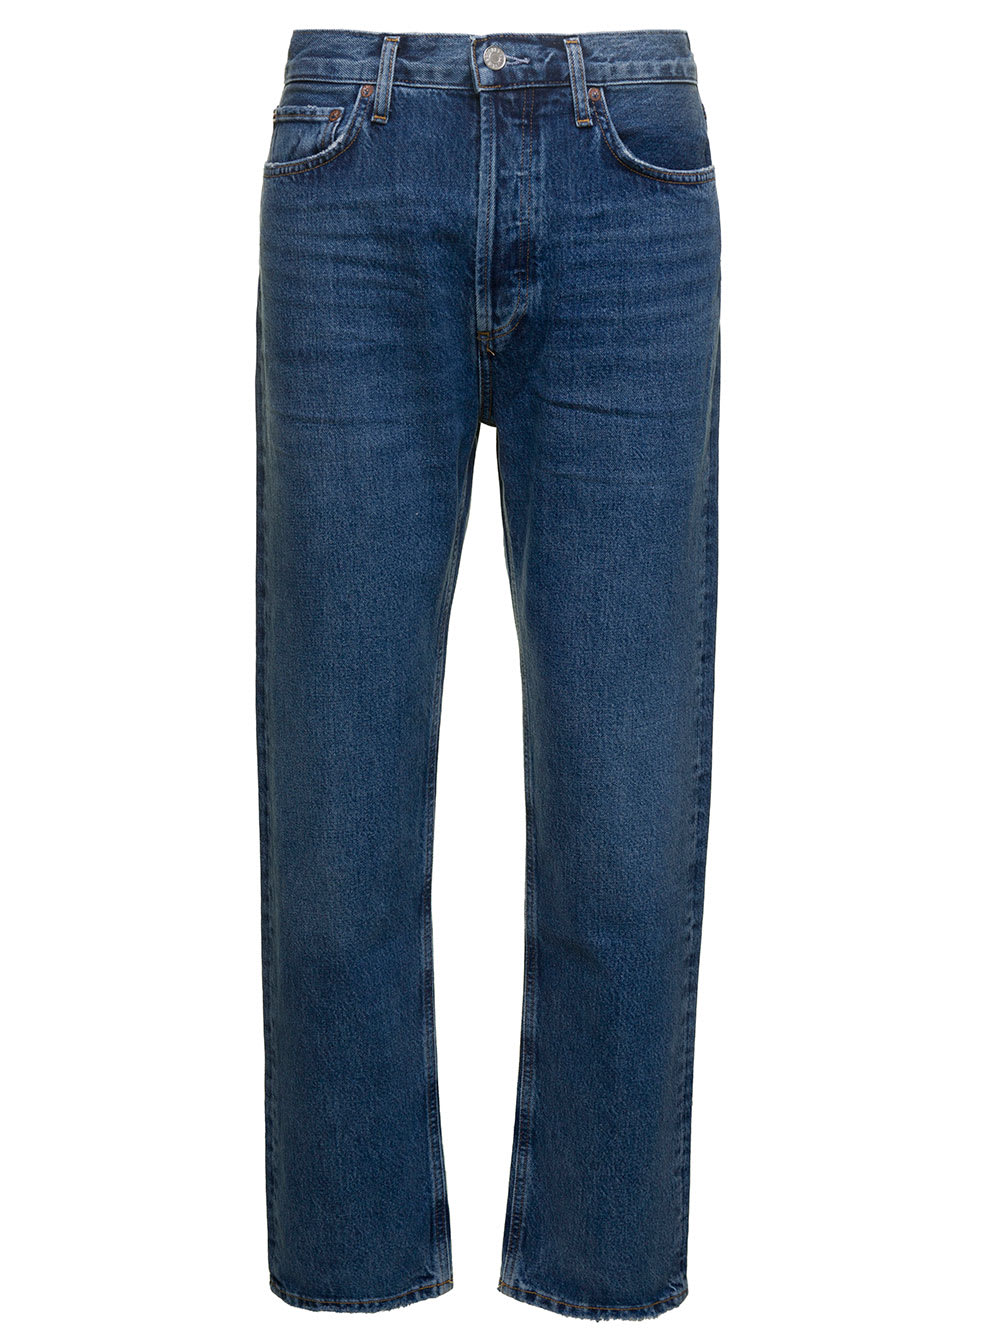 AGOLDE 90S BLUE FIVE-POCKET STYLE STRAIGHT JEANS IN COTTON DENIM WOMAN